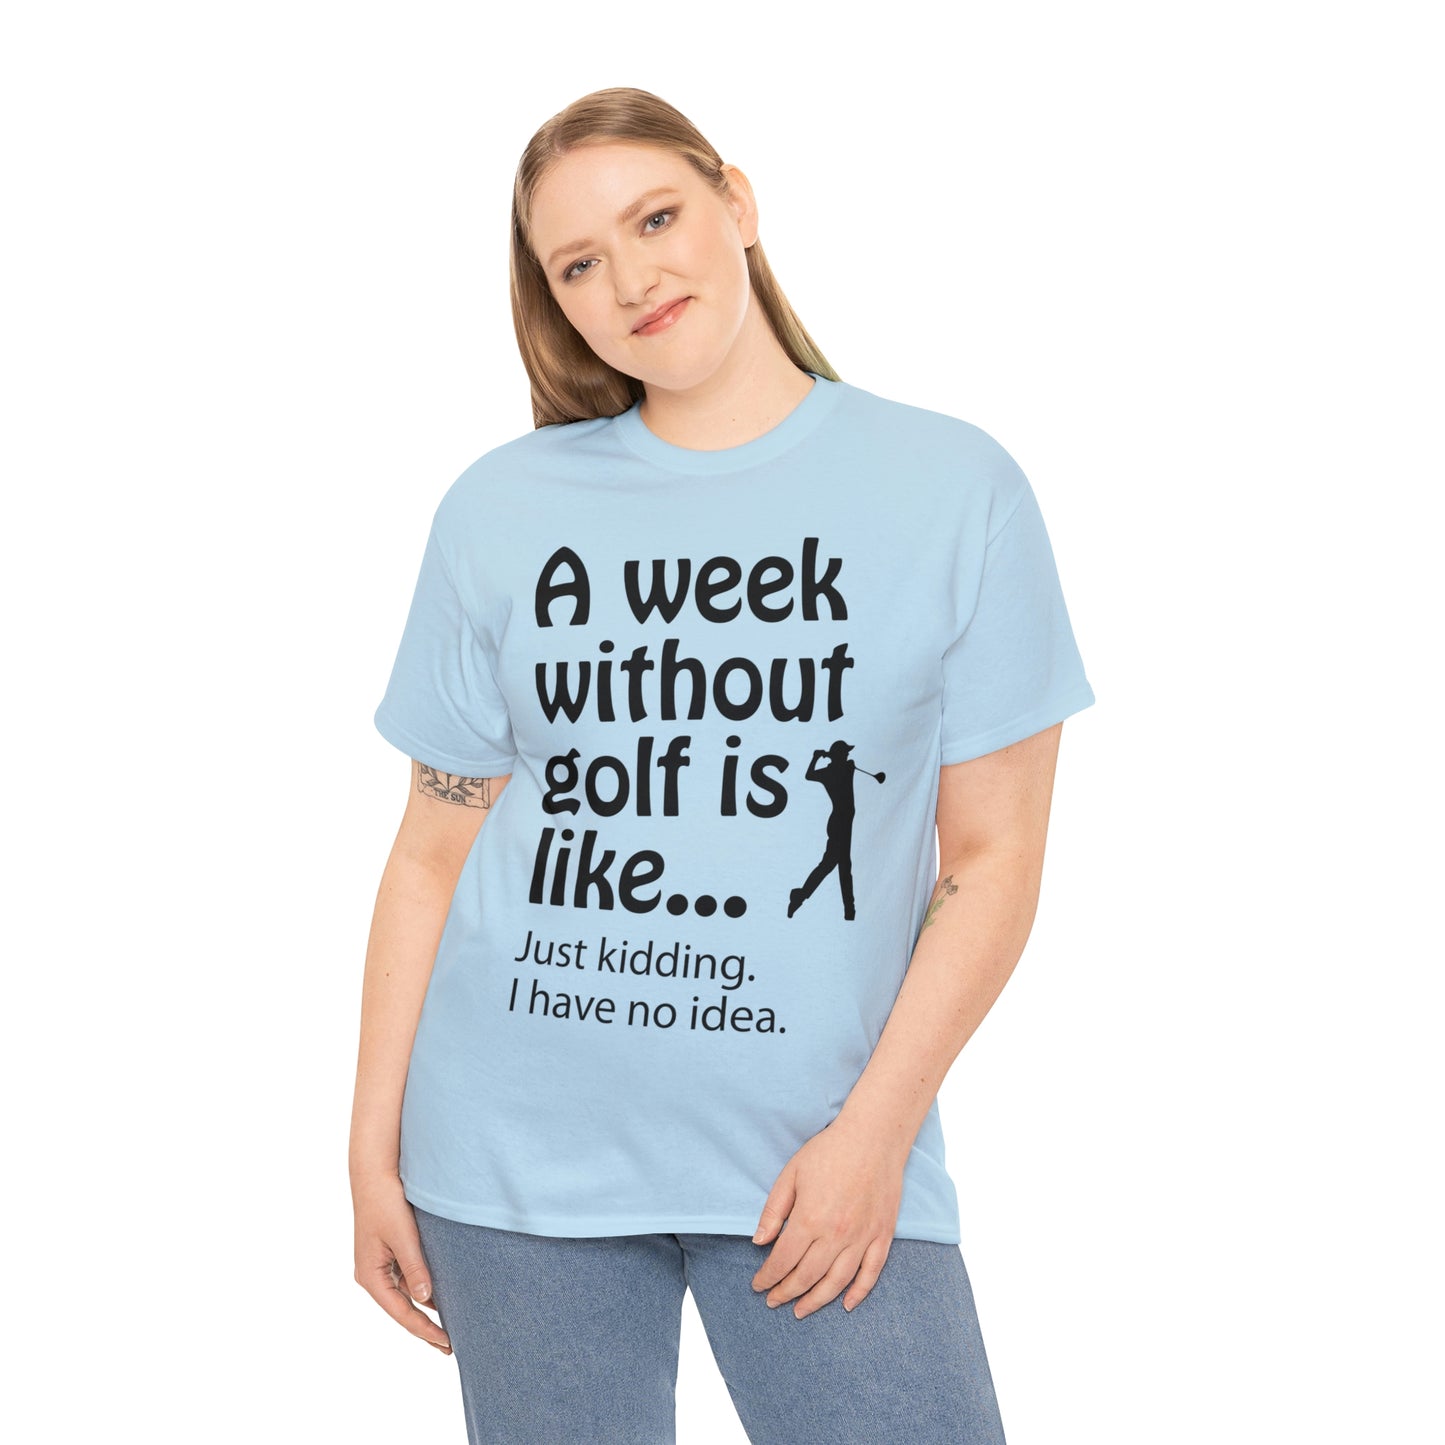 What does a week without golf feel like? (I don't wanna know) t-shirt